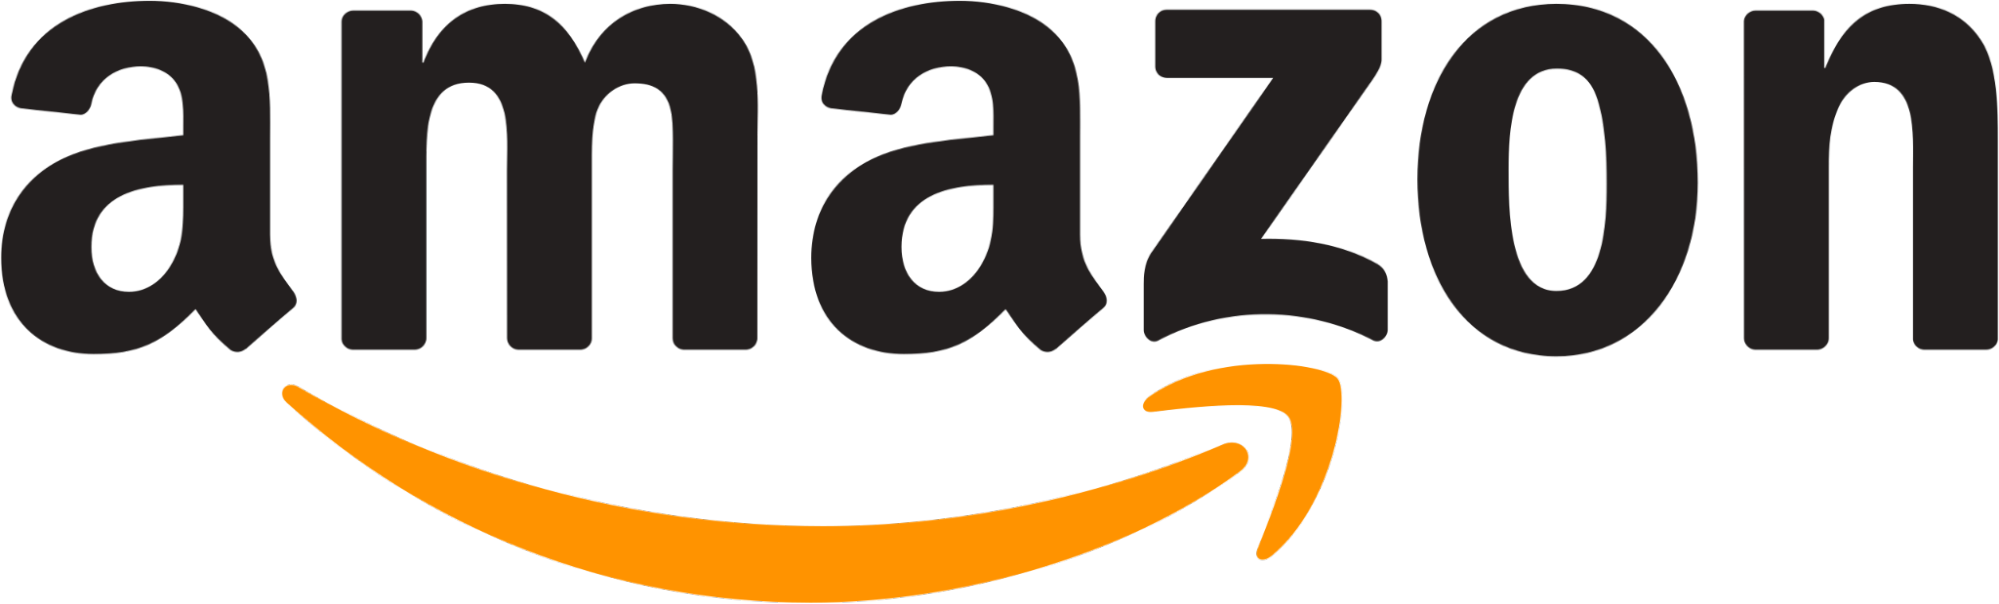 The Amazon logo is written in lowercase black font with an orange hand-drawn arrow at the bottom